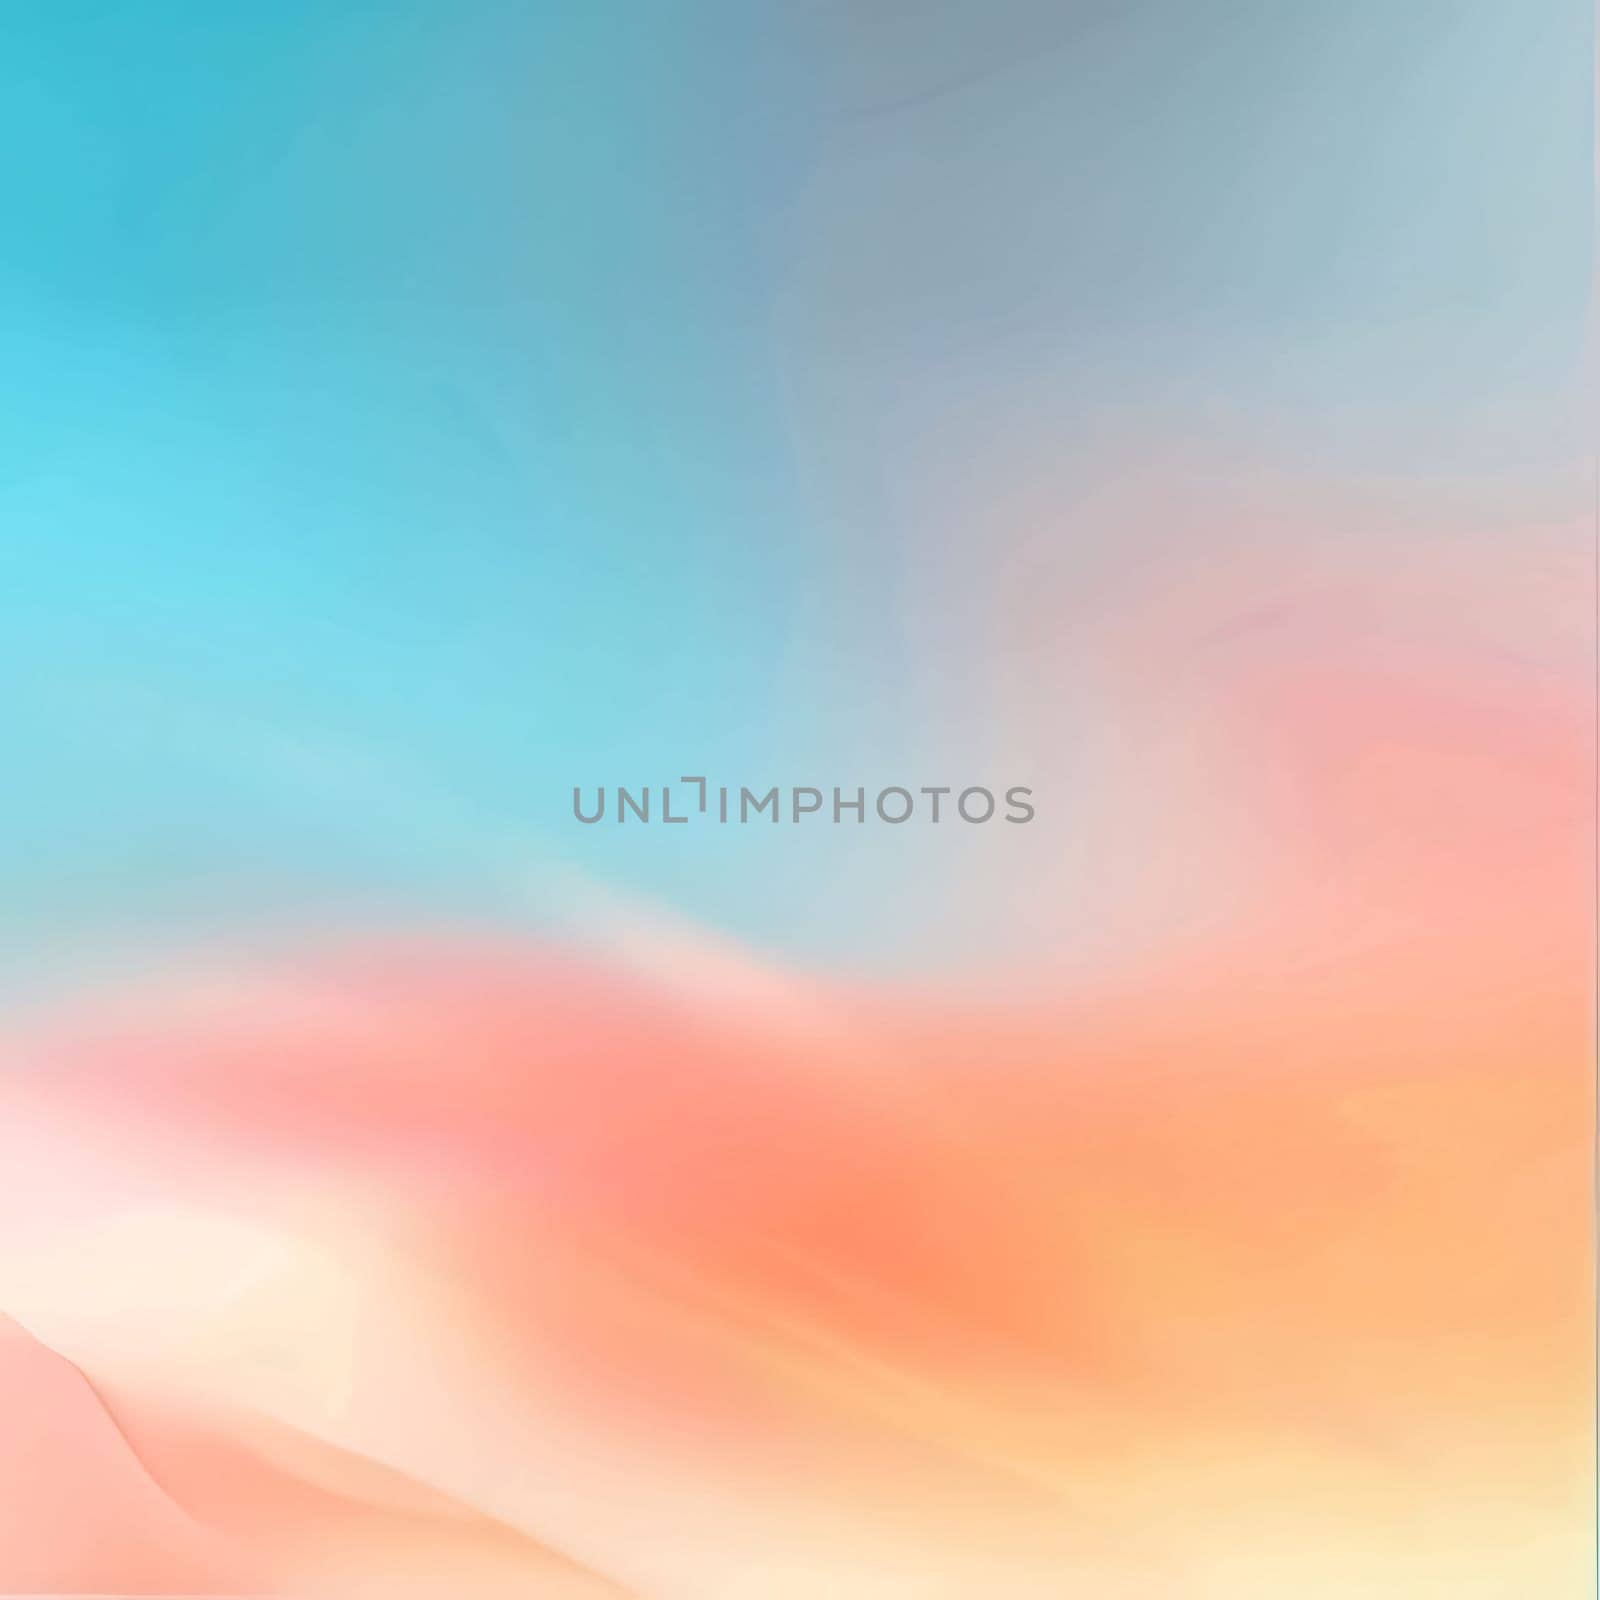 Abstract background design: Abstract colorful pastel gradient background for web design, banner or presentation